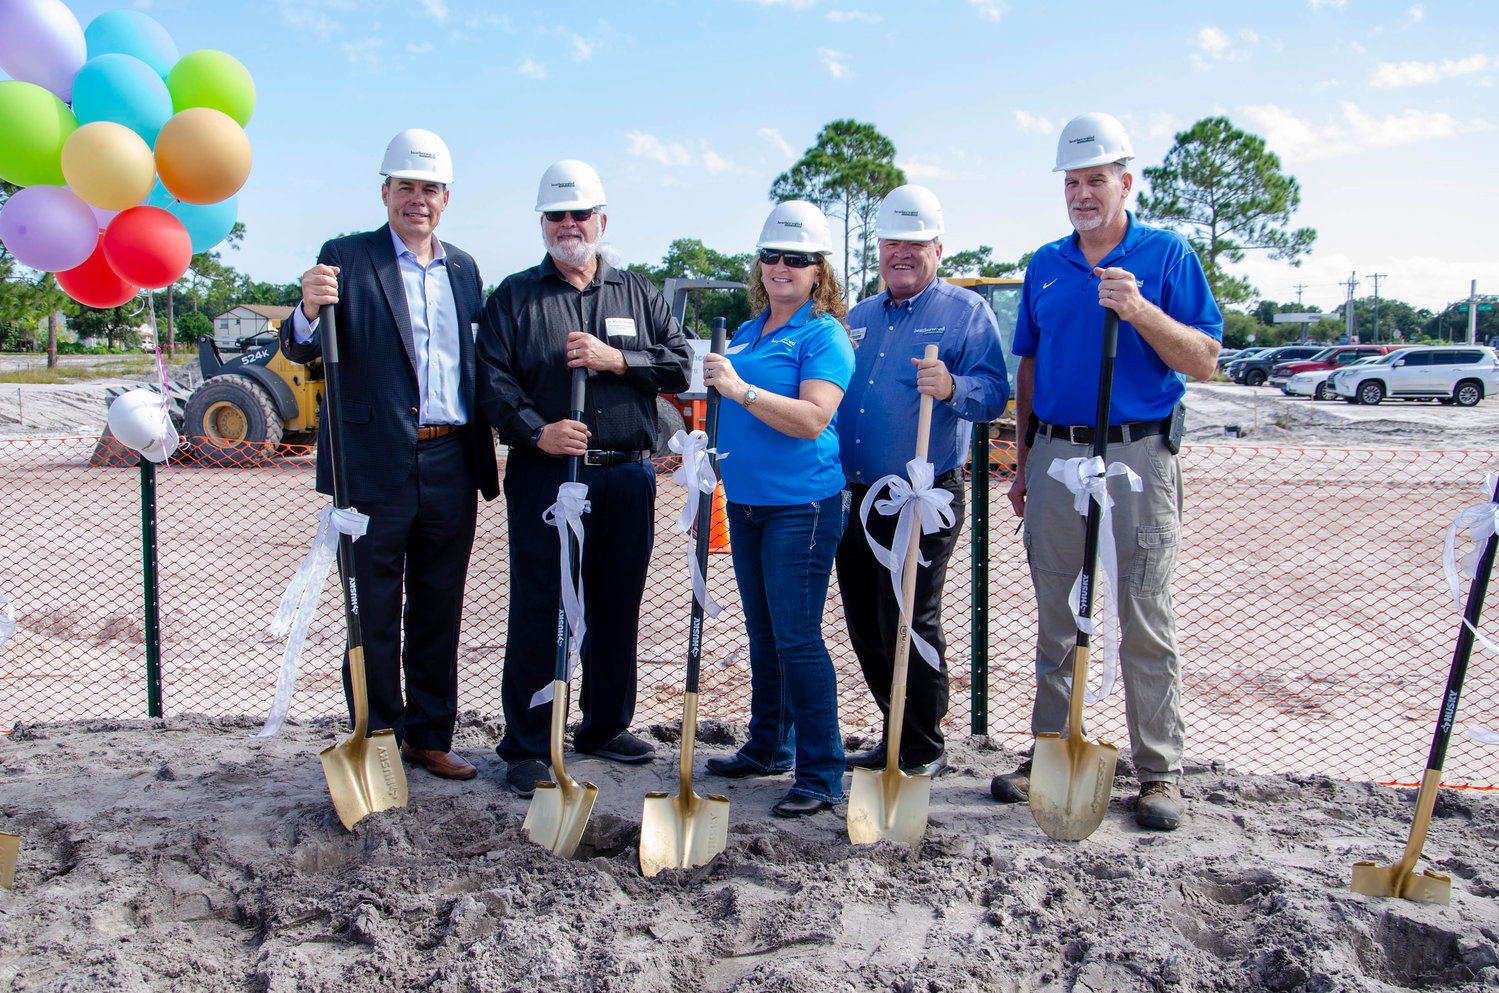 Heatherwood Construction Company broke ground on Phase 1 of an affordable housing project in Immokalee.